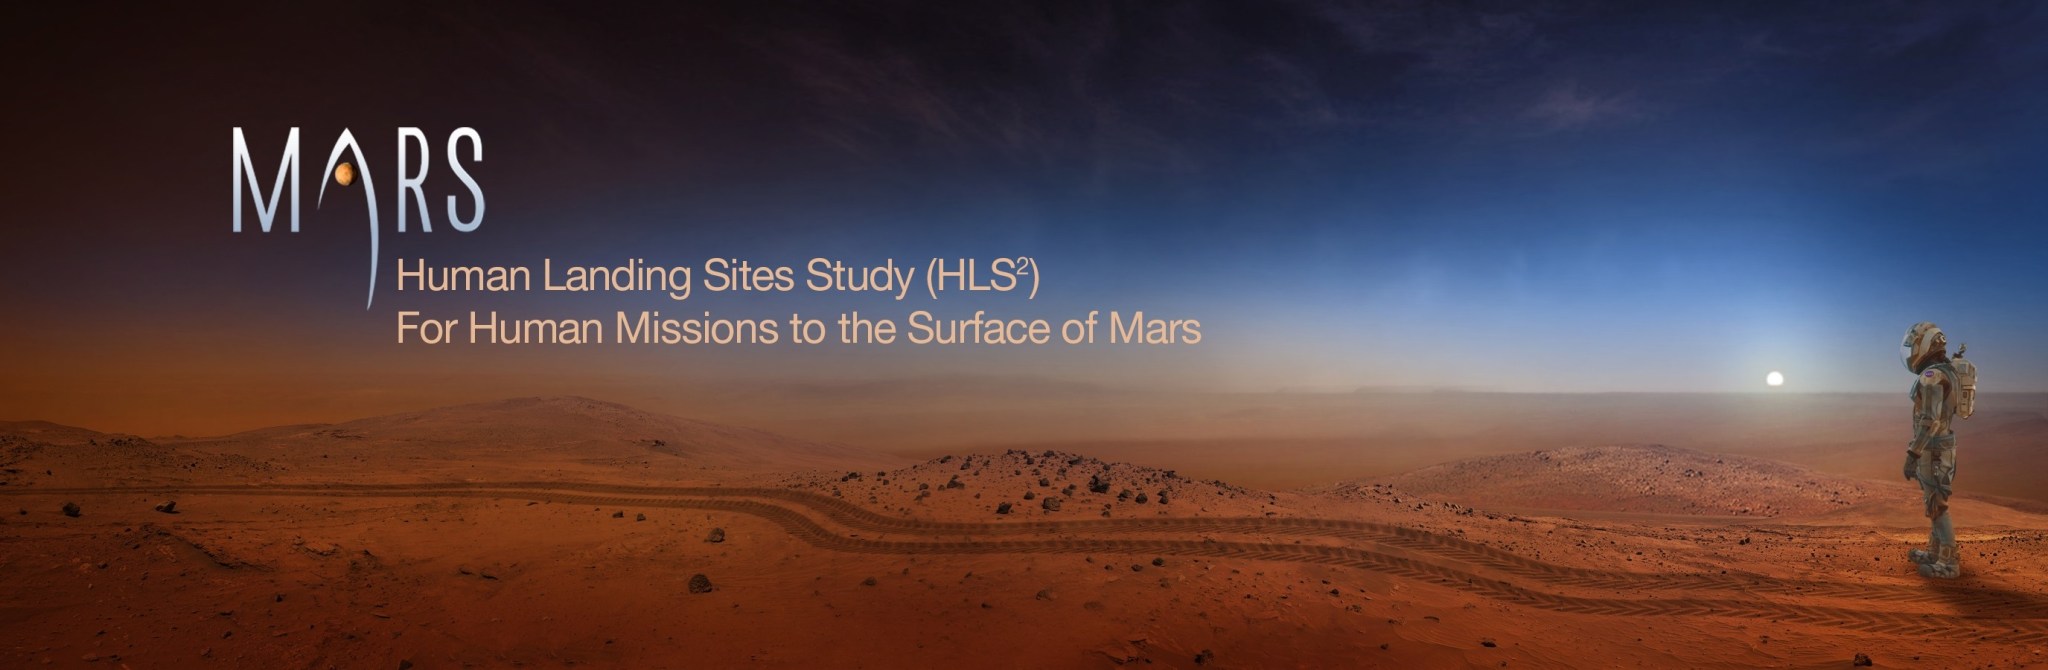 Mars Human Landing Sites Study For Human Missions to the Surface of Mars